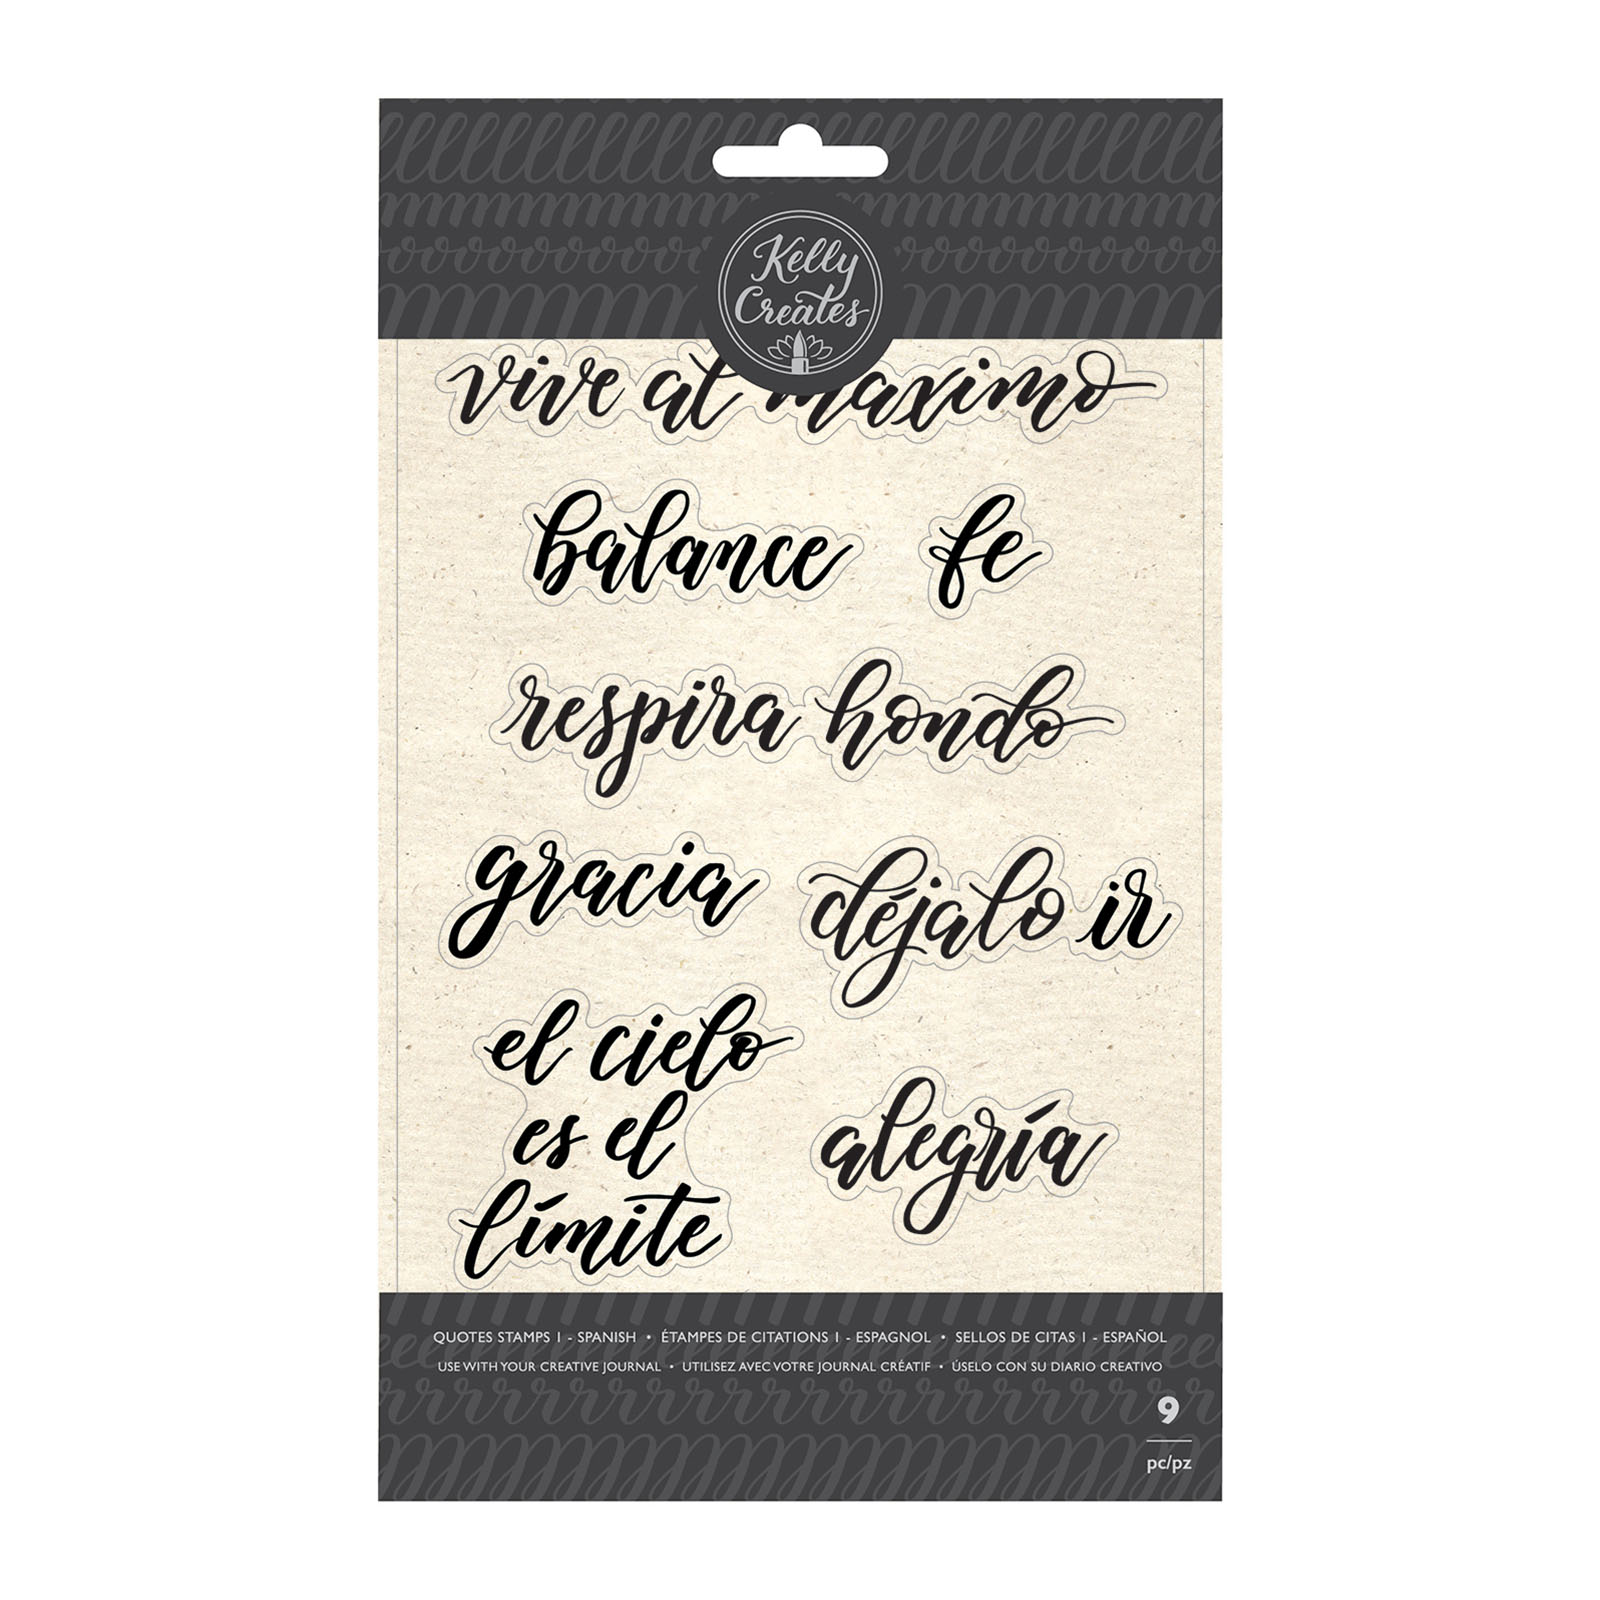 Kelly Creates • Traceable stamp quotes 1 spanish 9pc